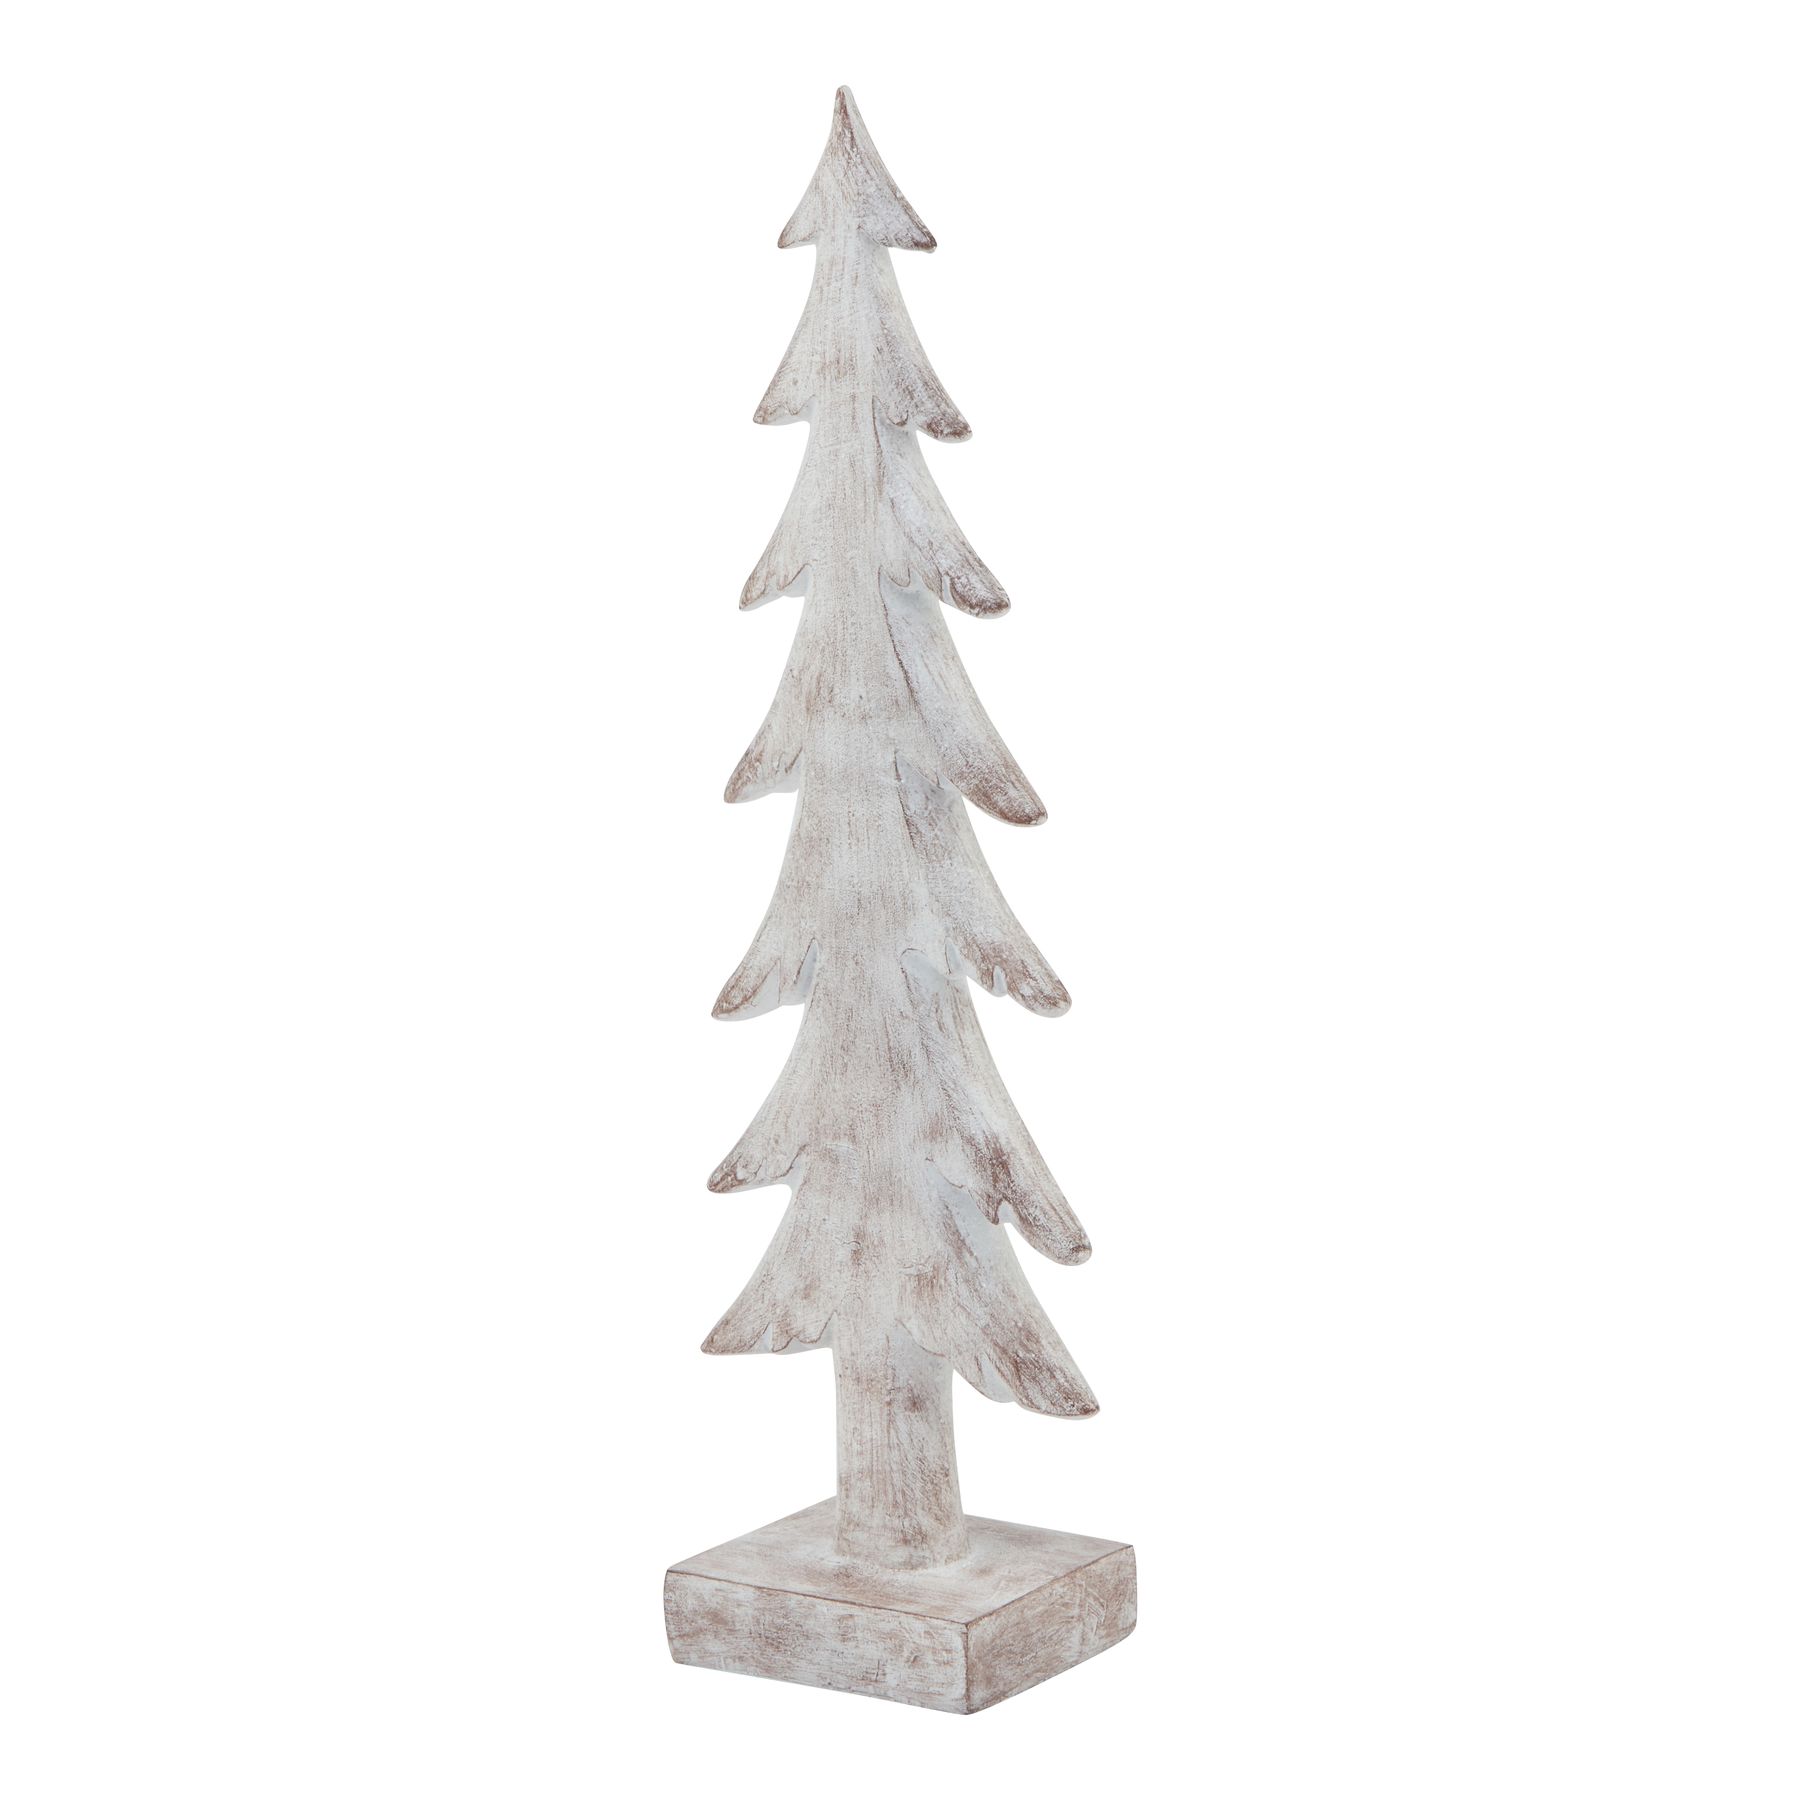 Large Snowy Forest Tree Sculpture - Image 1